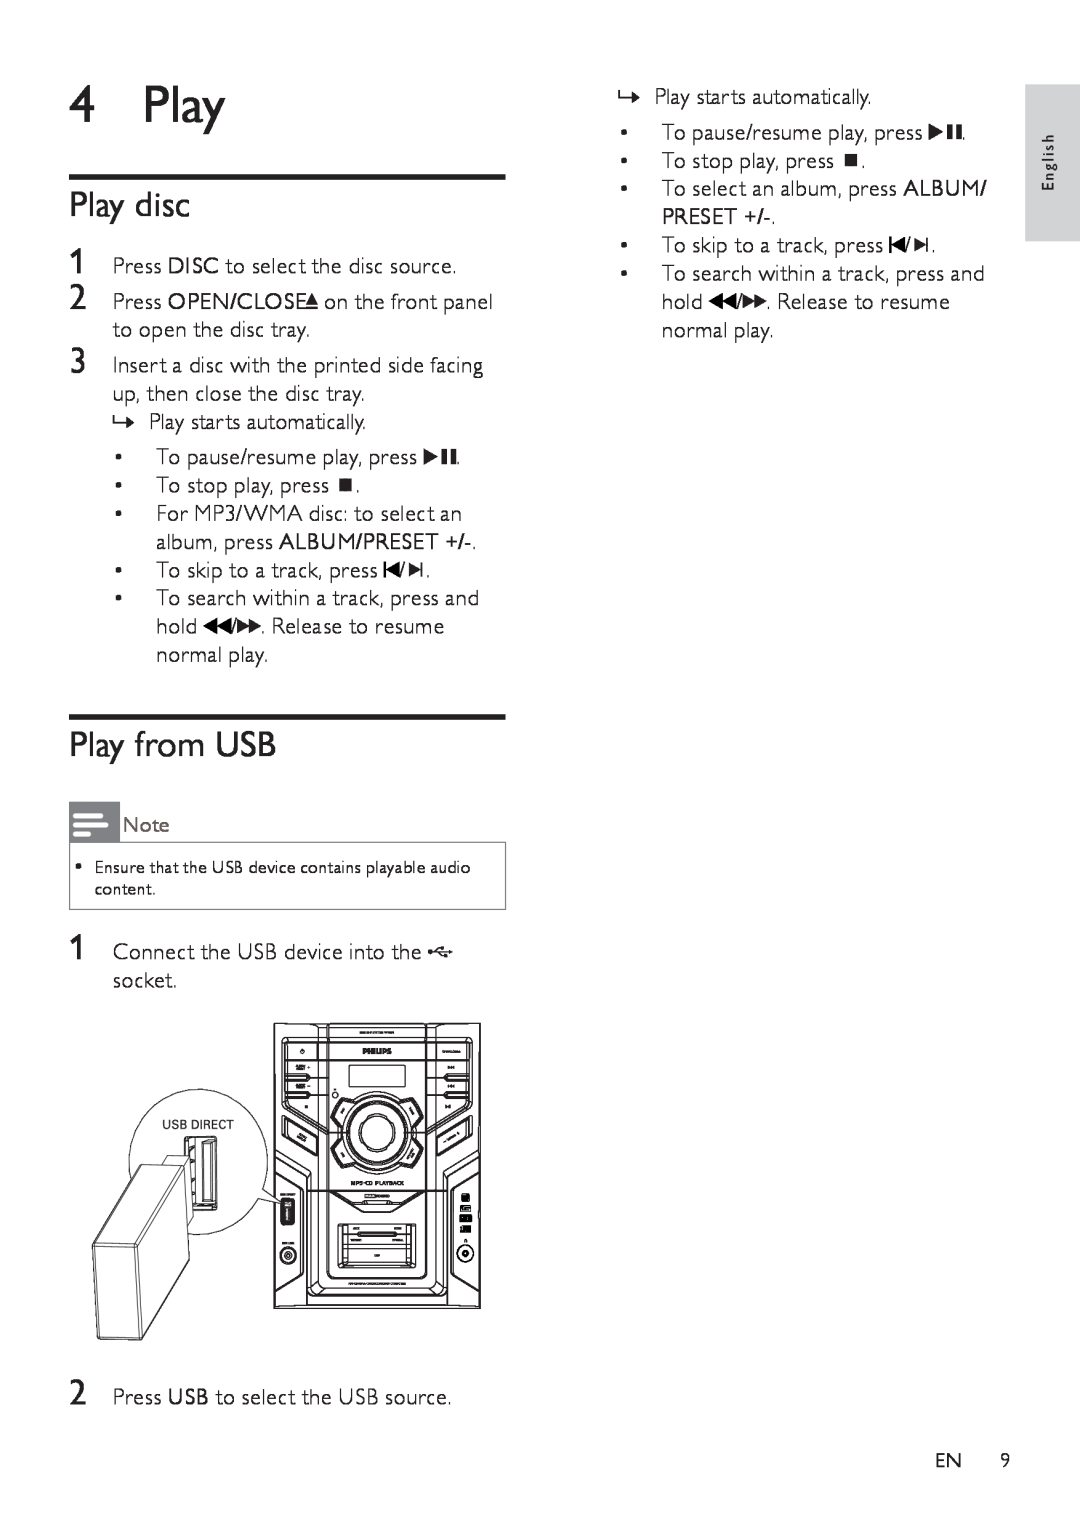 Philips FWM208 user manual Play disc, Play from USB 